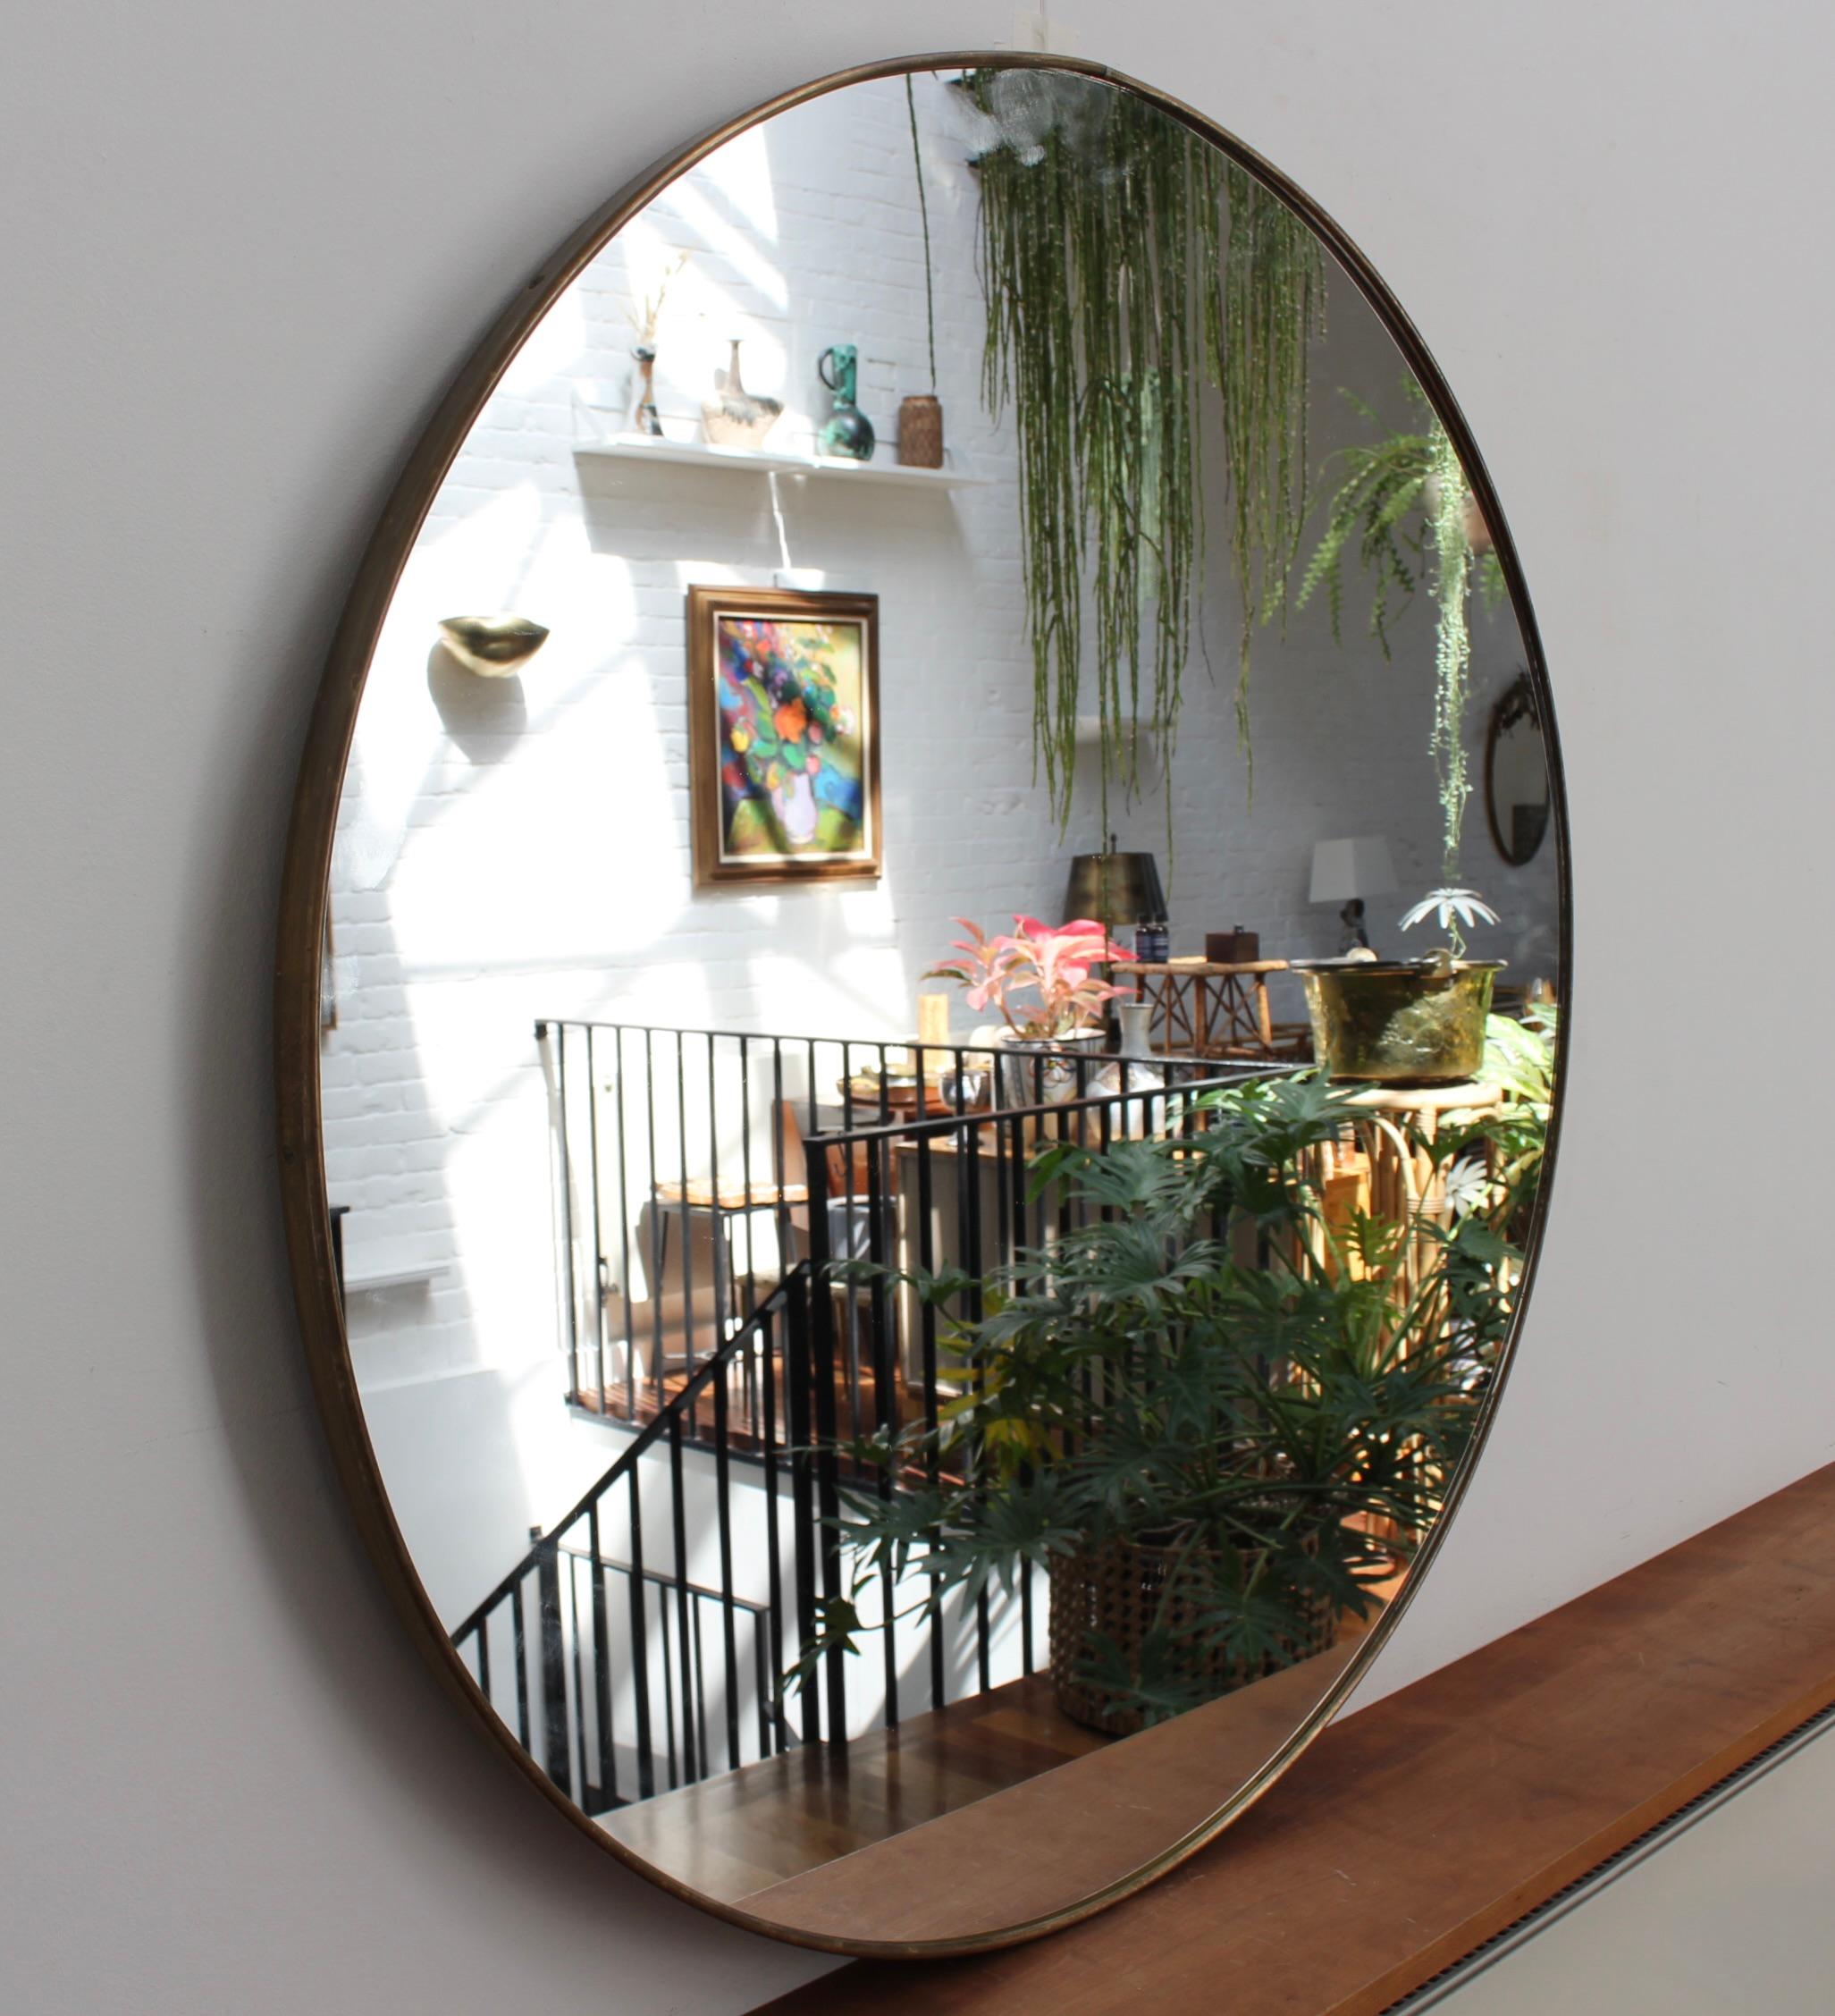 Mid-century Italian wall mirror with brass frame (circa 1960s). The mirror is a perfectly shaped circle in a Modern style. It is in good overall condition. A beautiful, aged patina develops on the brass frame. A sturdy backing provides structural